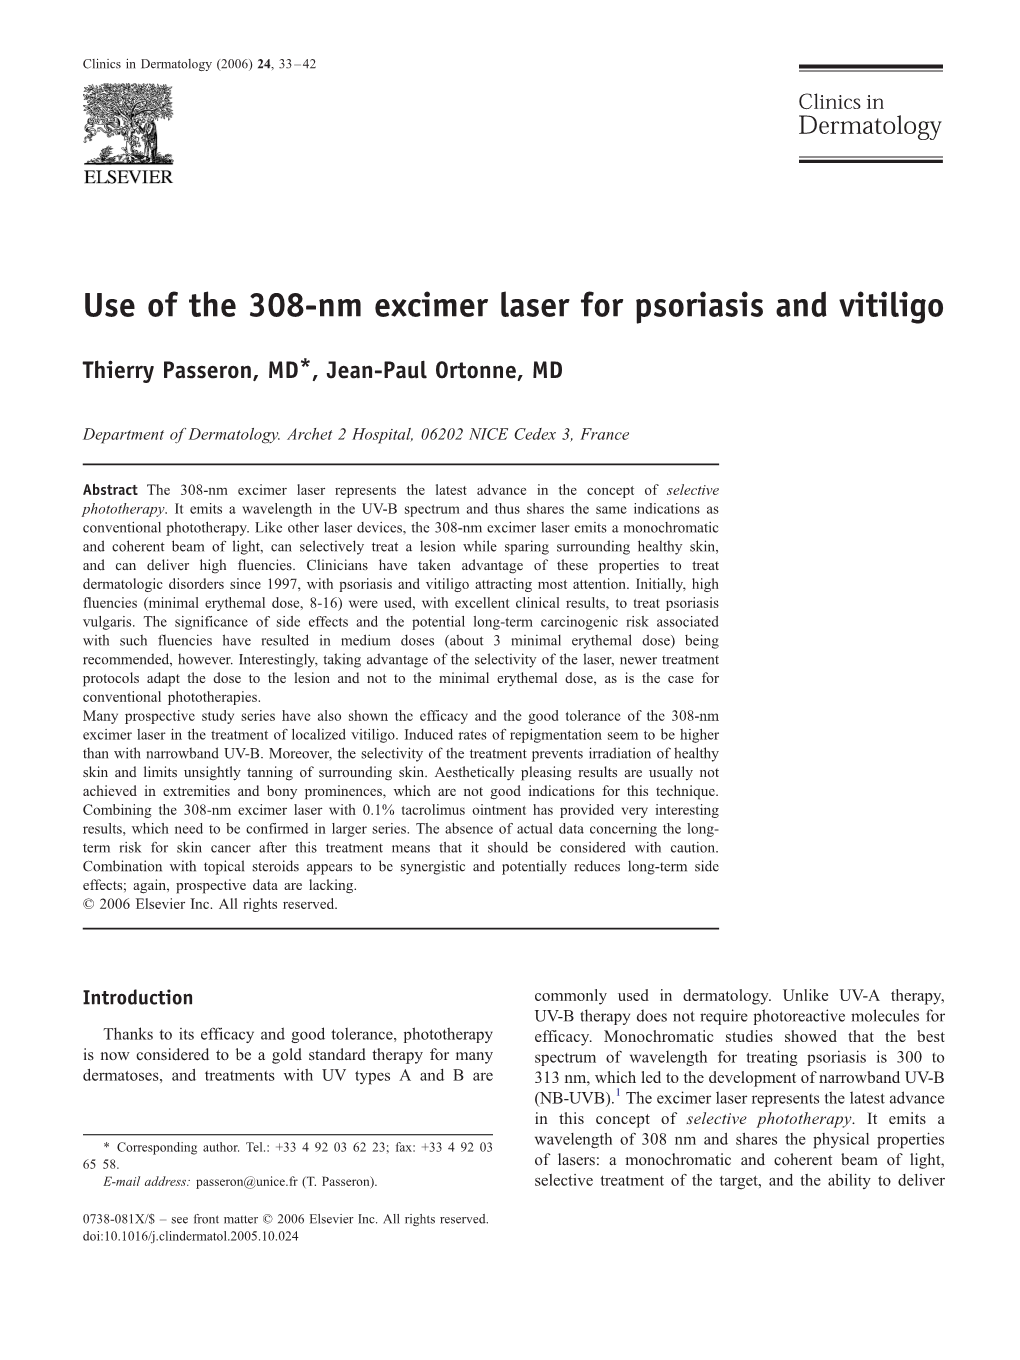 Use of the 308-Nm Excimer Laser for Psoriasis and Vitiligo